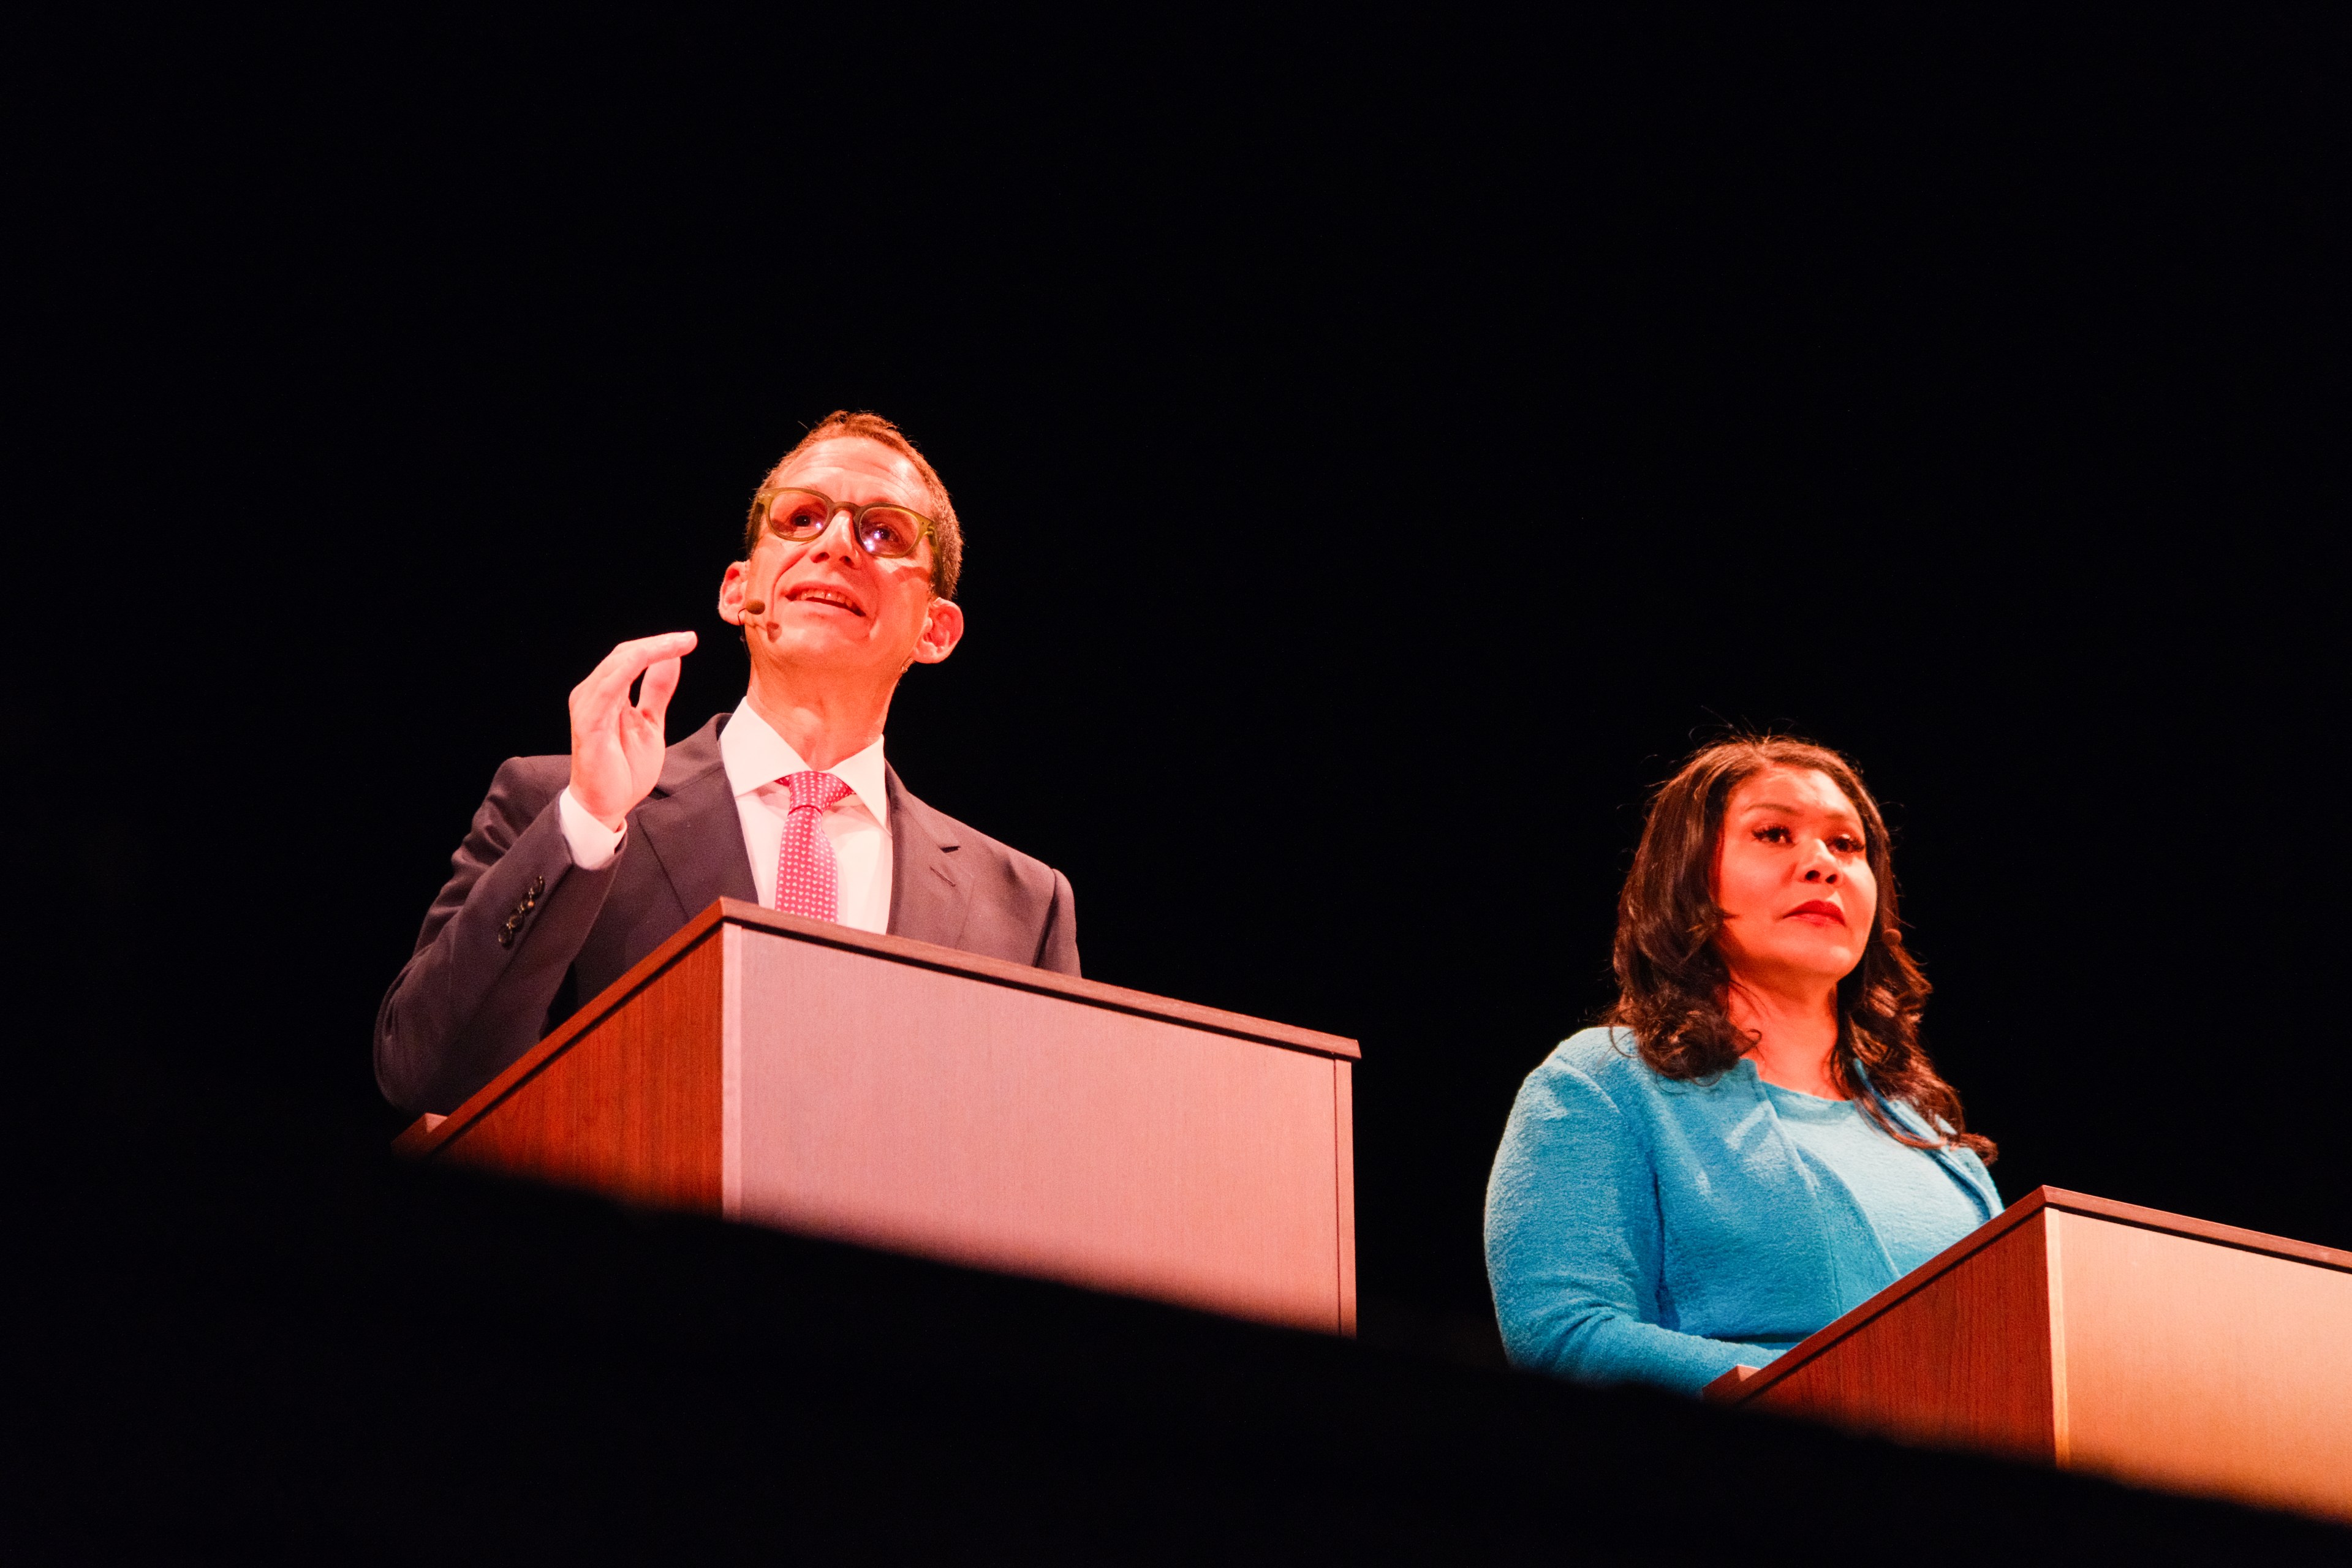 Two people, a man in a suit and tie, and a woman in a blue outfit, are standing behind podiums on a stage, speaking, against a black background.